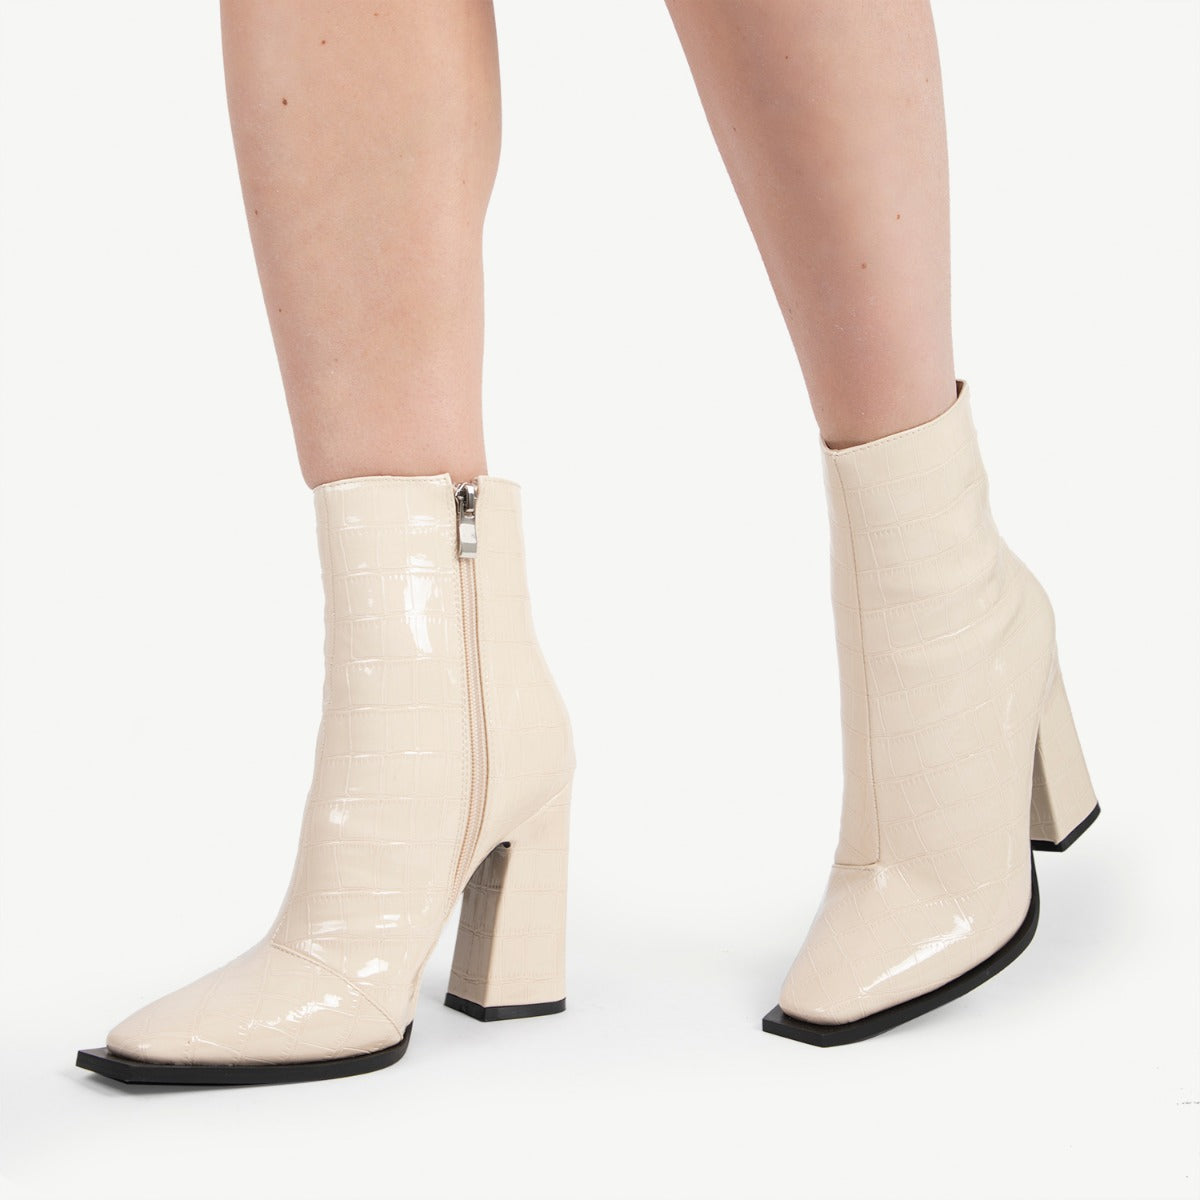 RAID Livvy Block Heeled Ankle Boot in White Croc